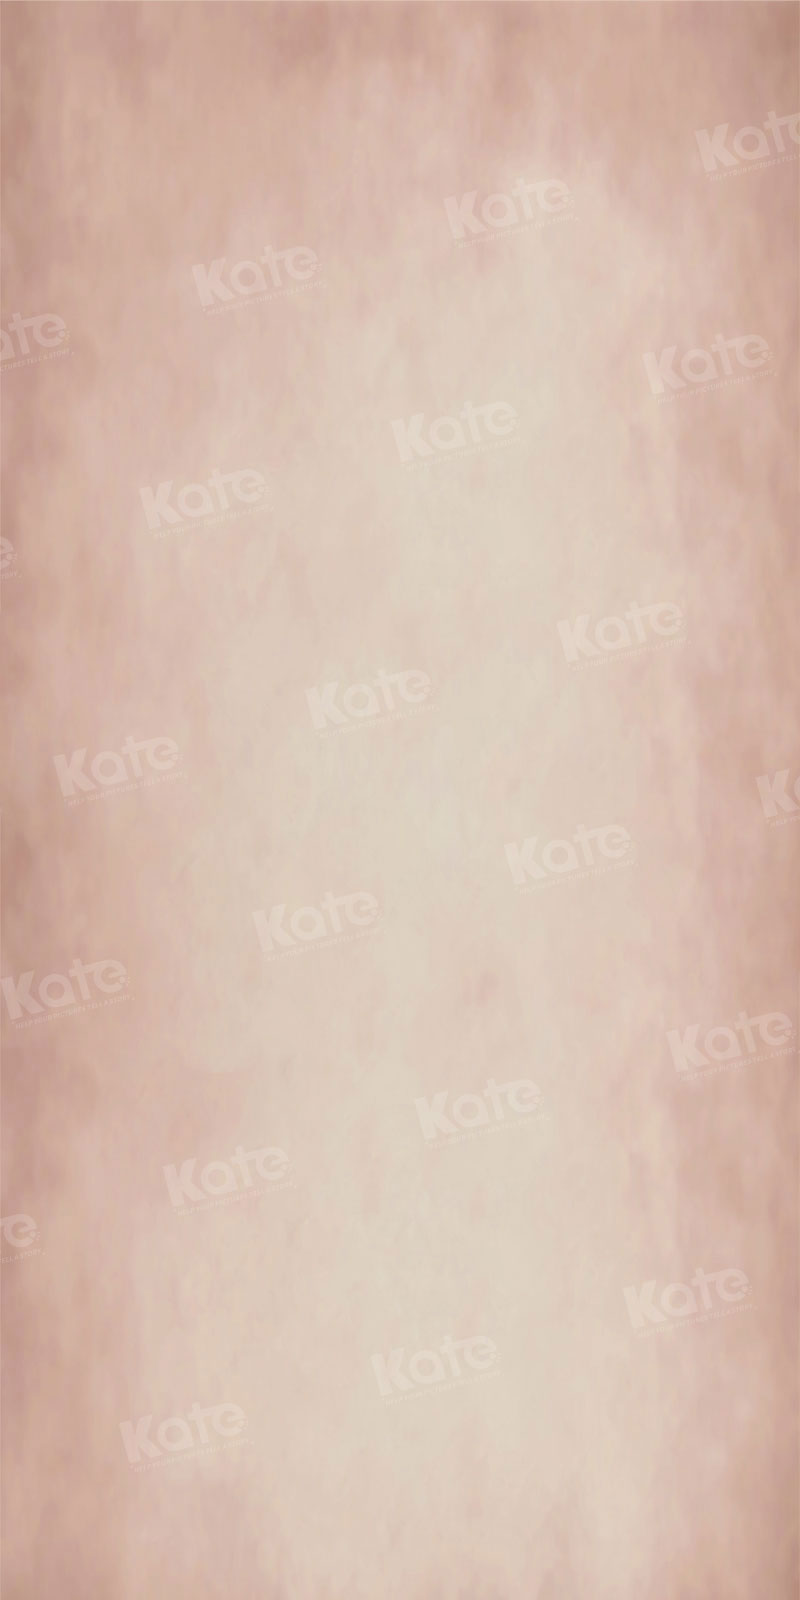 Kate Abstract Light Pink Backdrop for Photography